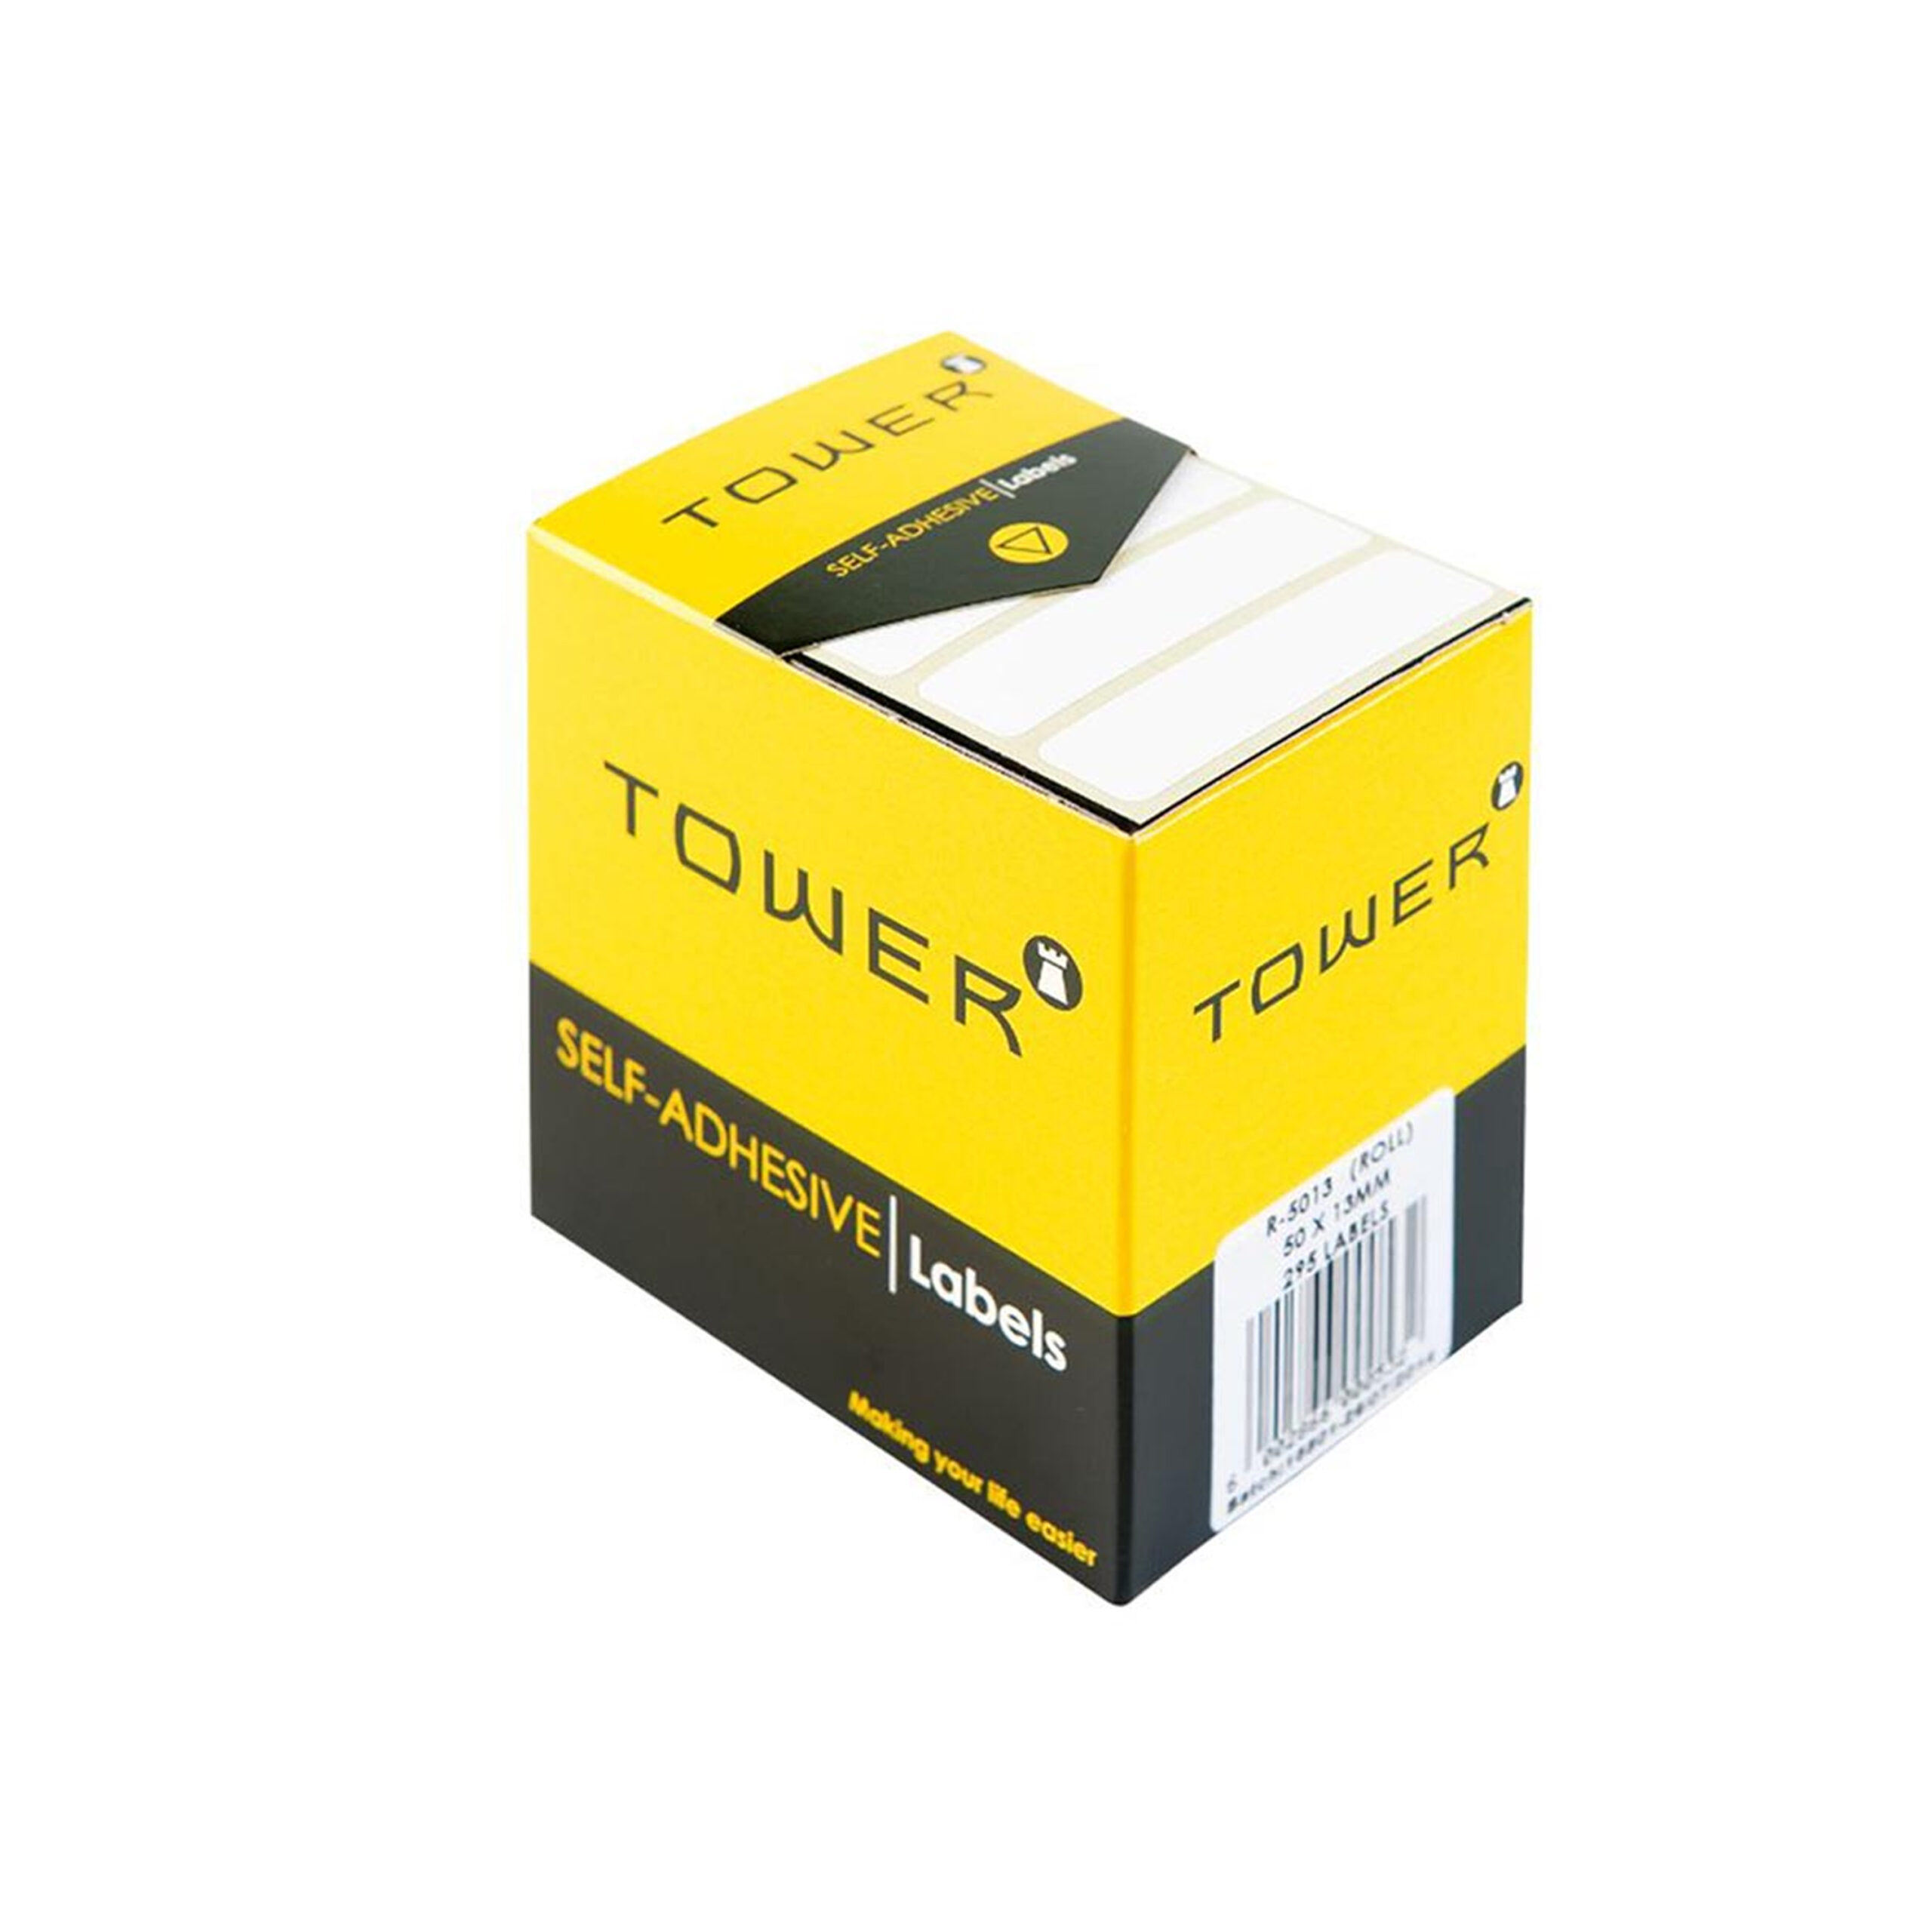 TOWER  SELF
ADHESIVE WHITE
LABELS  50x13mm 
(295 LABELS)